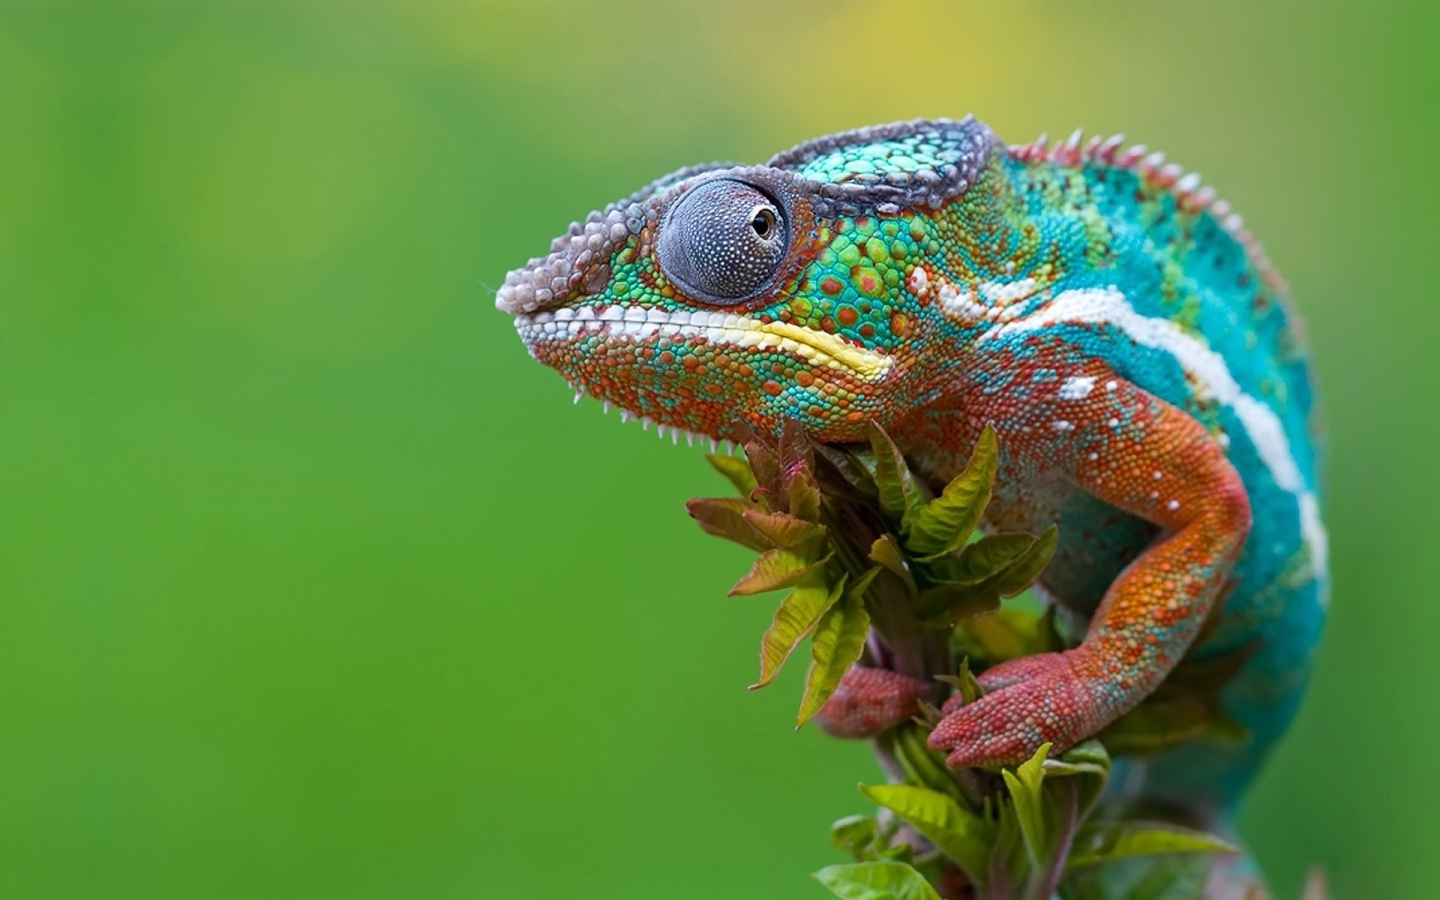 Chameleon Camouflage for 1440 x 900 widescreen resolution